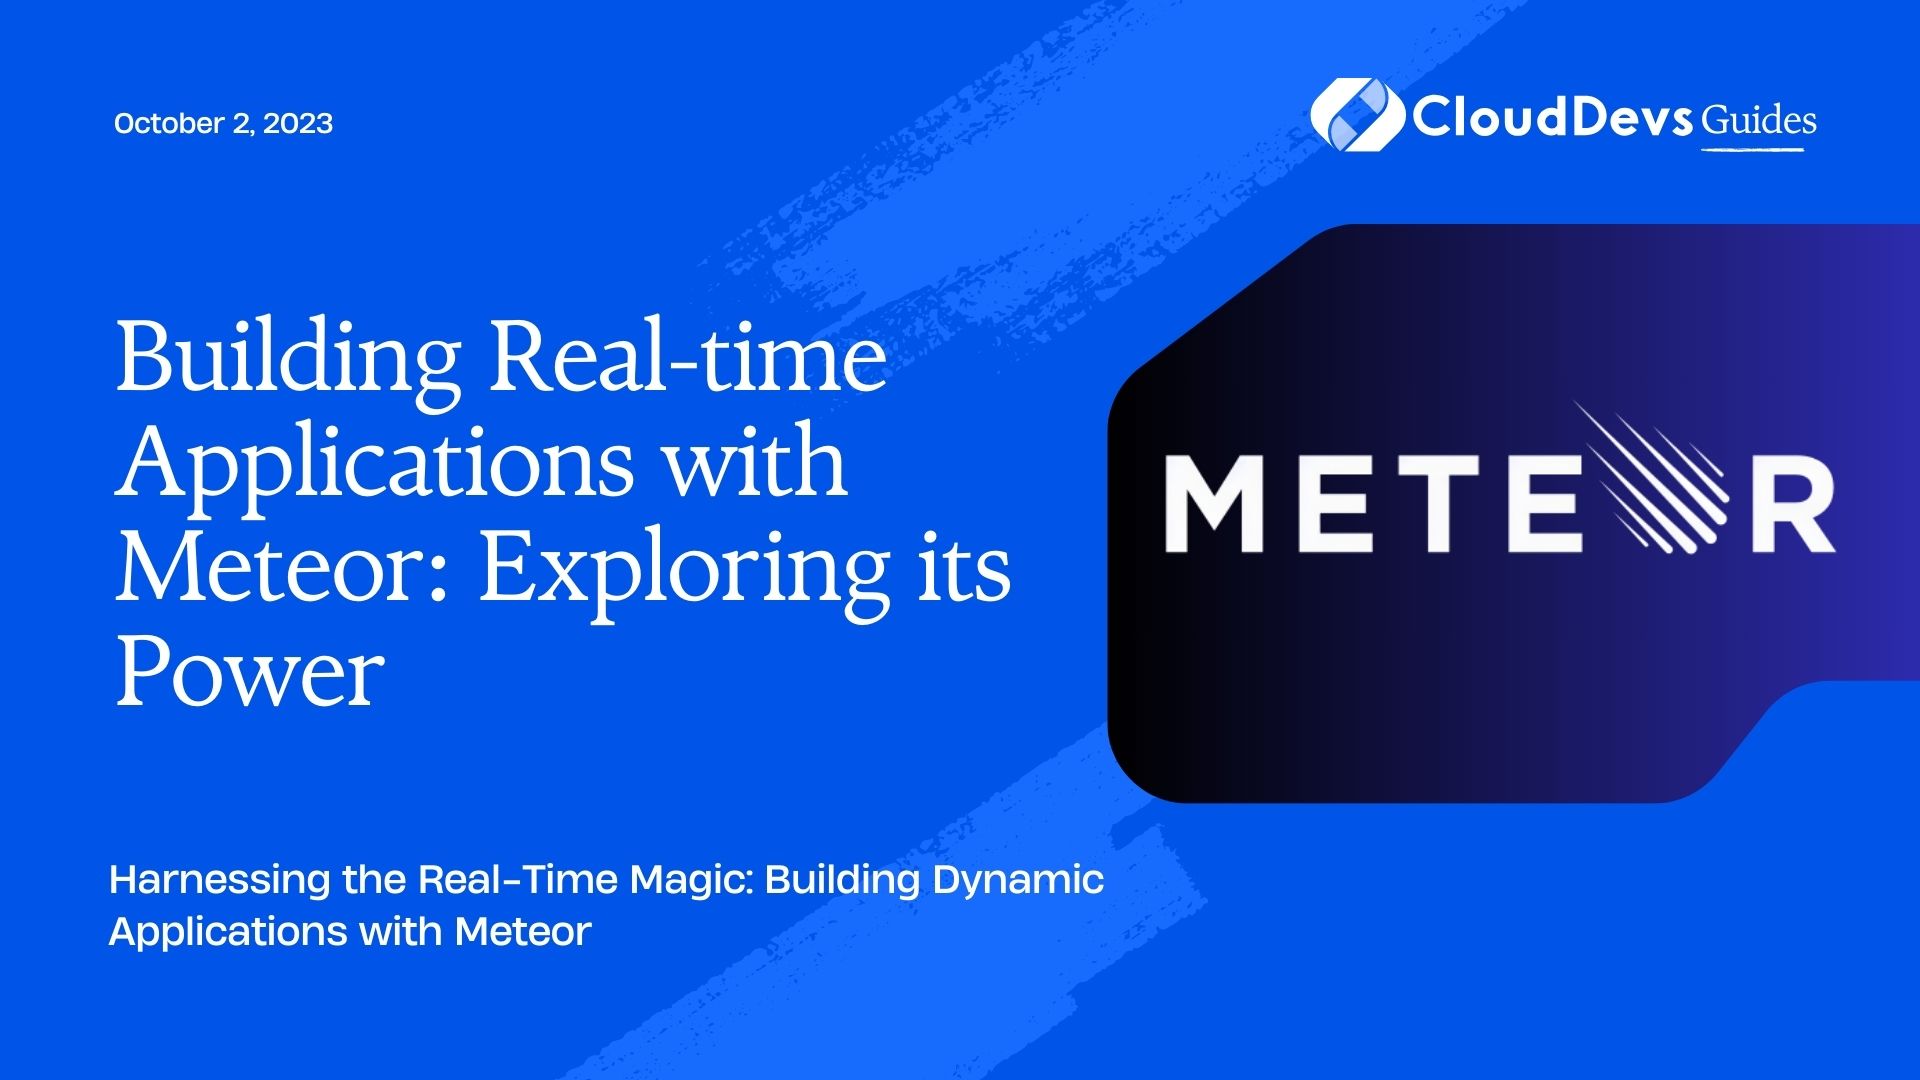 Building Real-time Applications with Meteor: Exploring its Power